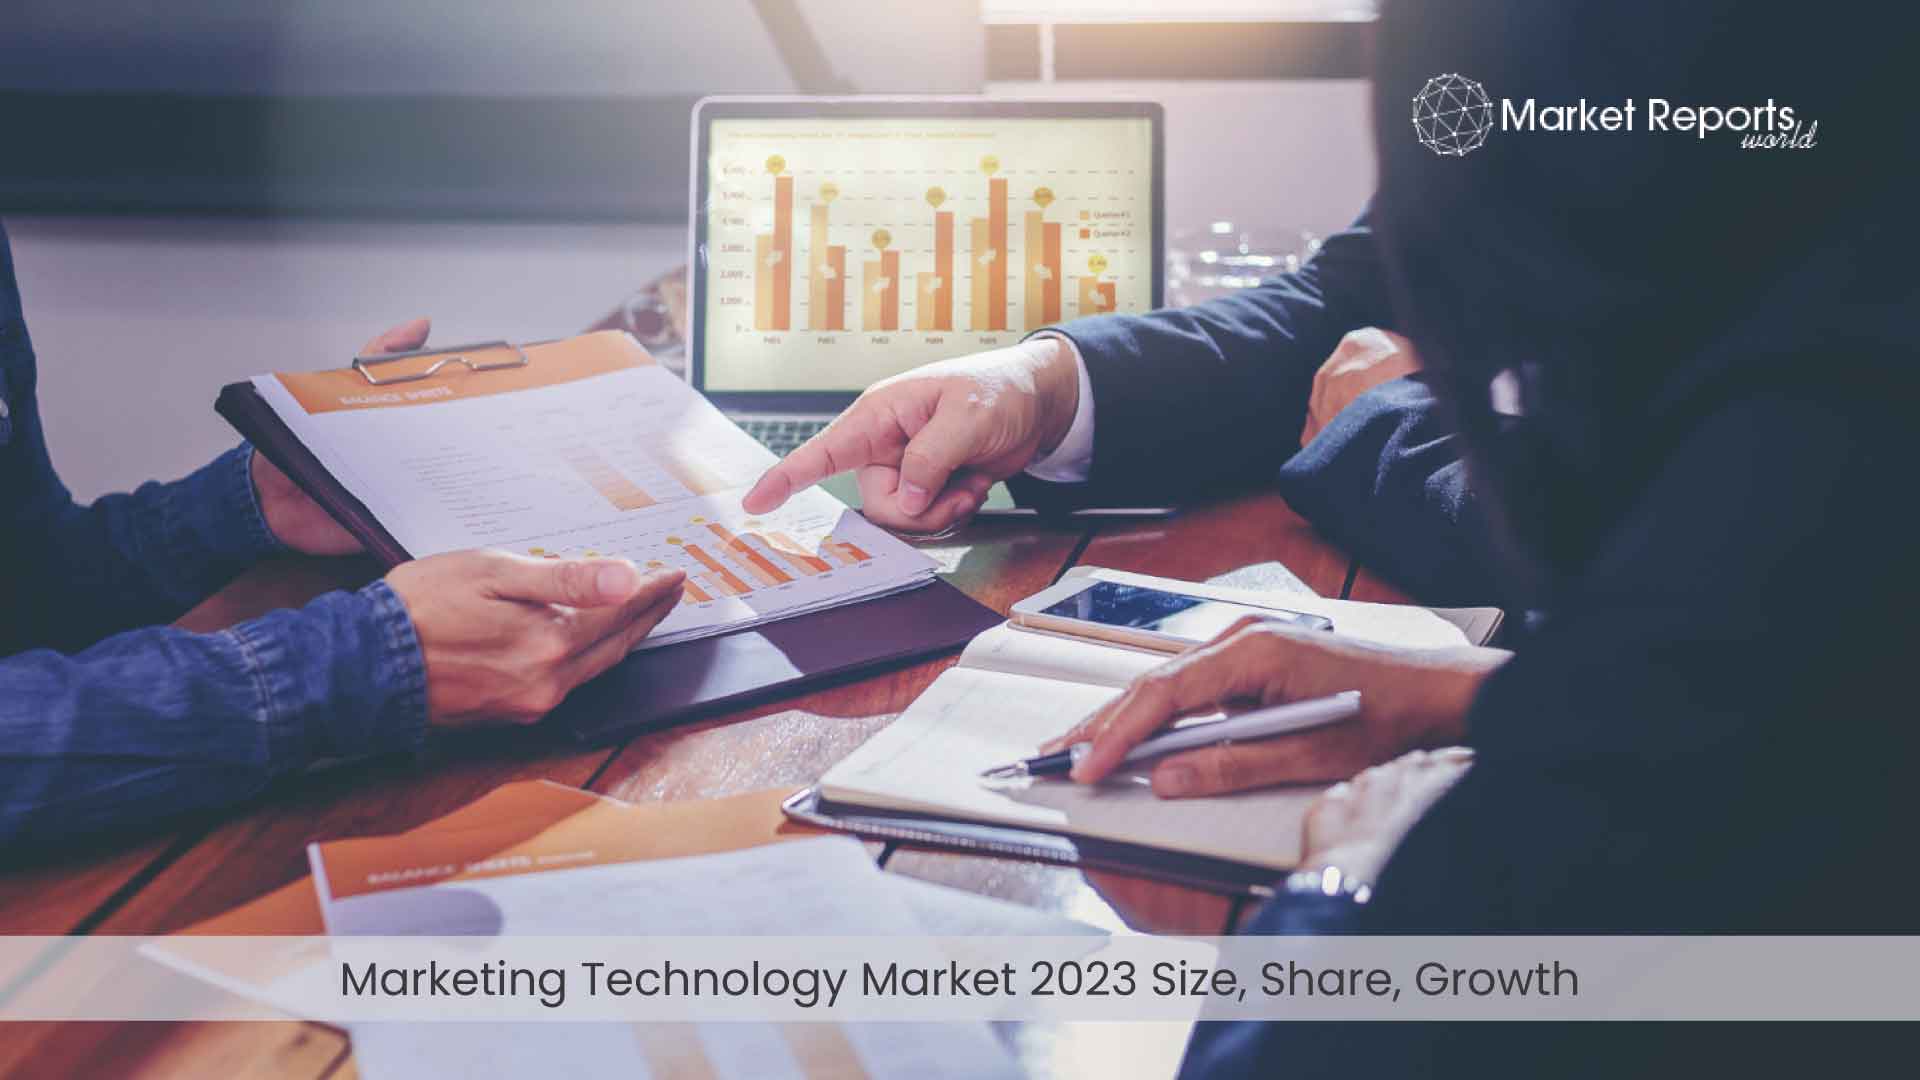 Marketing Technology Market 2023 Size, Share, Growth | Global Market Demand, Key Players, New Developments, Type & Application, Market Dynamics, Mergers & Acquisitions, Expansion Plans and Revenue Analysis | Market Reports World